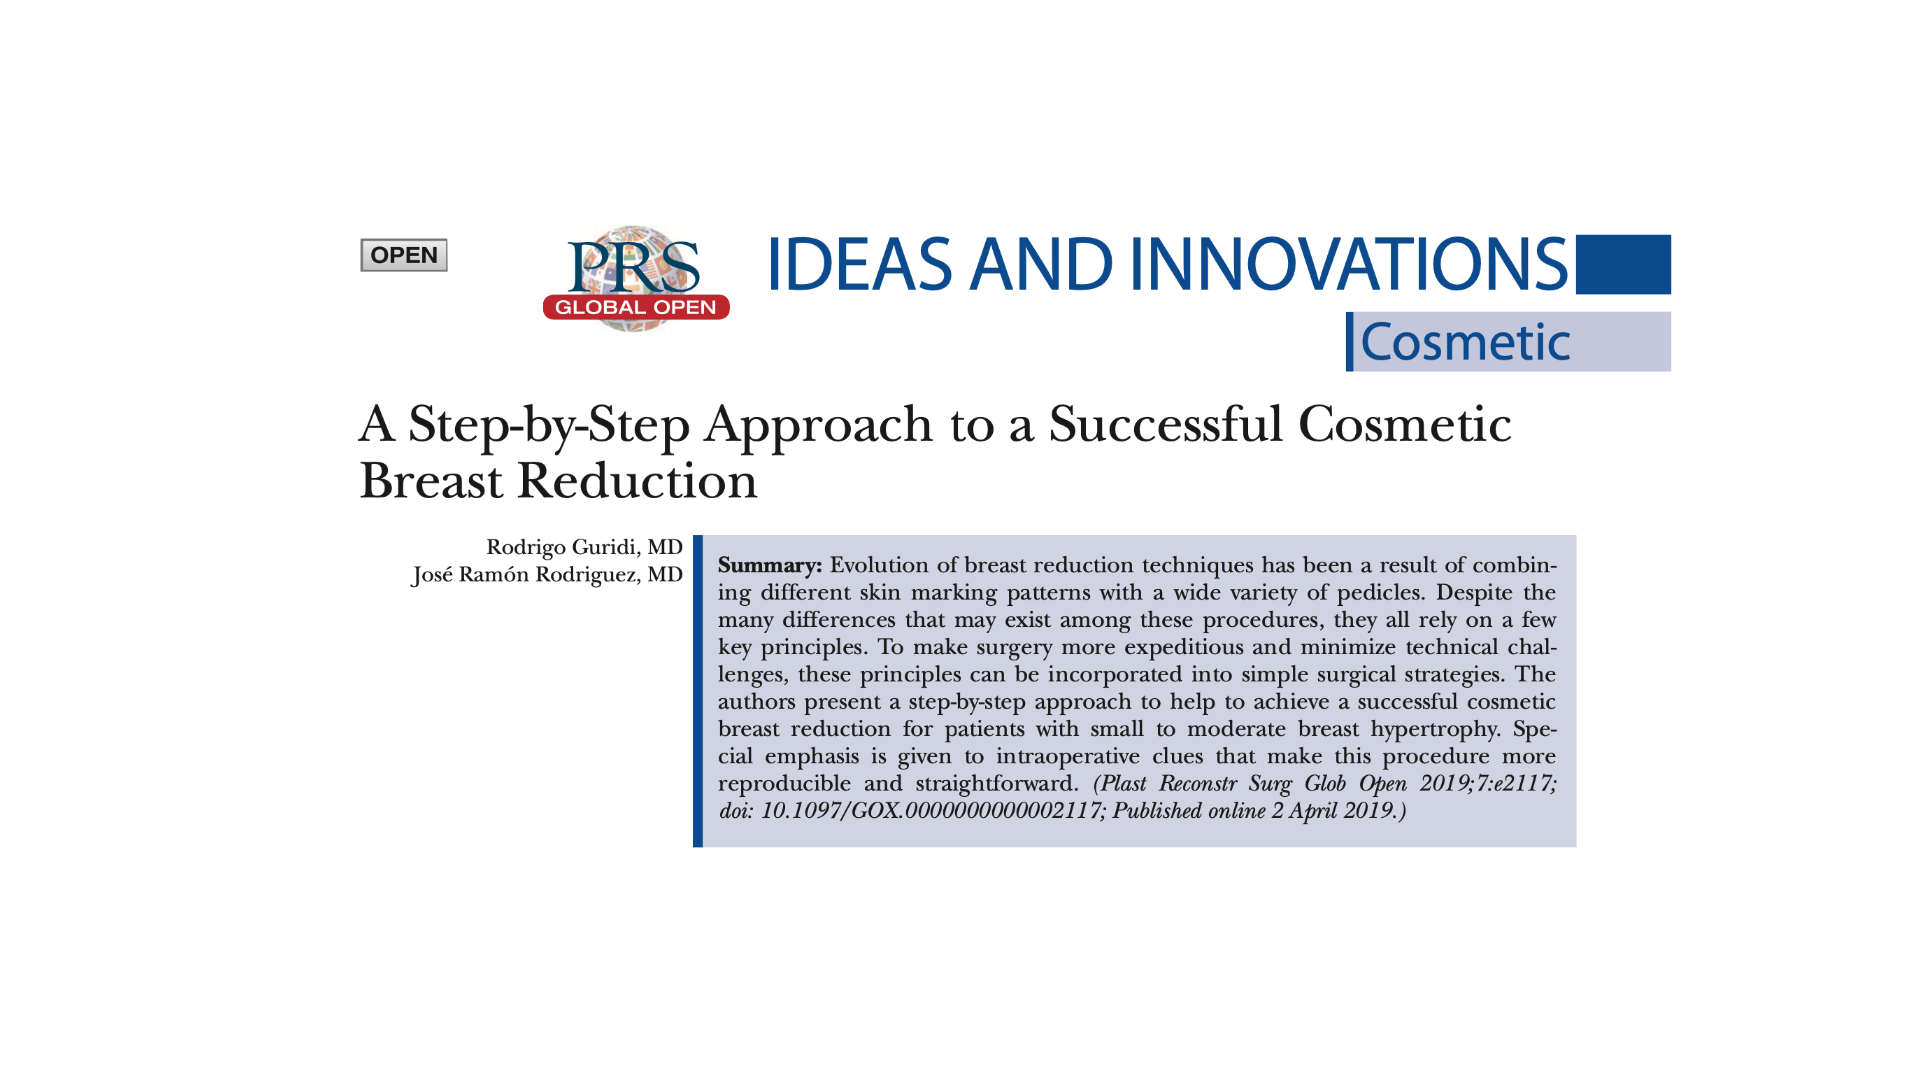 A Step-by-Step Approach to a Successful Cosmetic Breast Reduction (PRS)